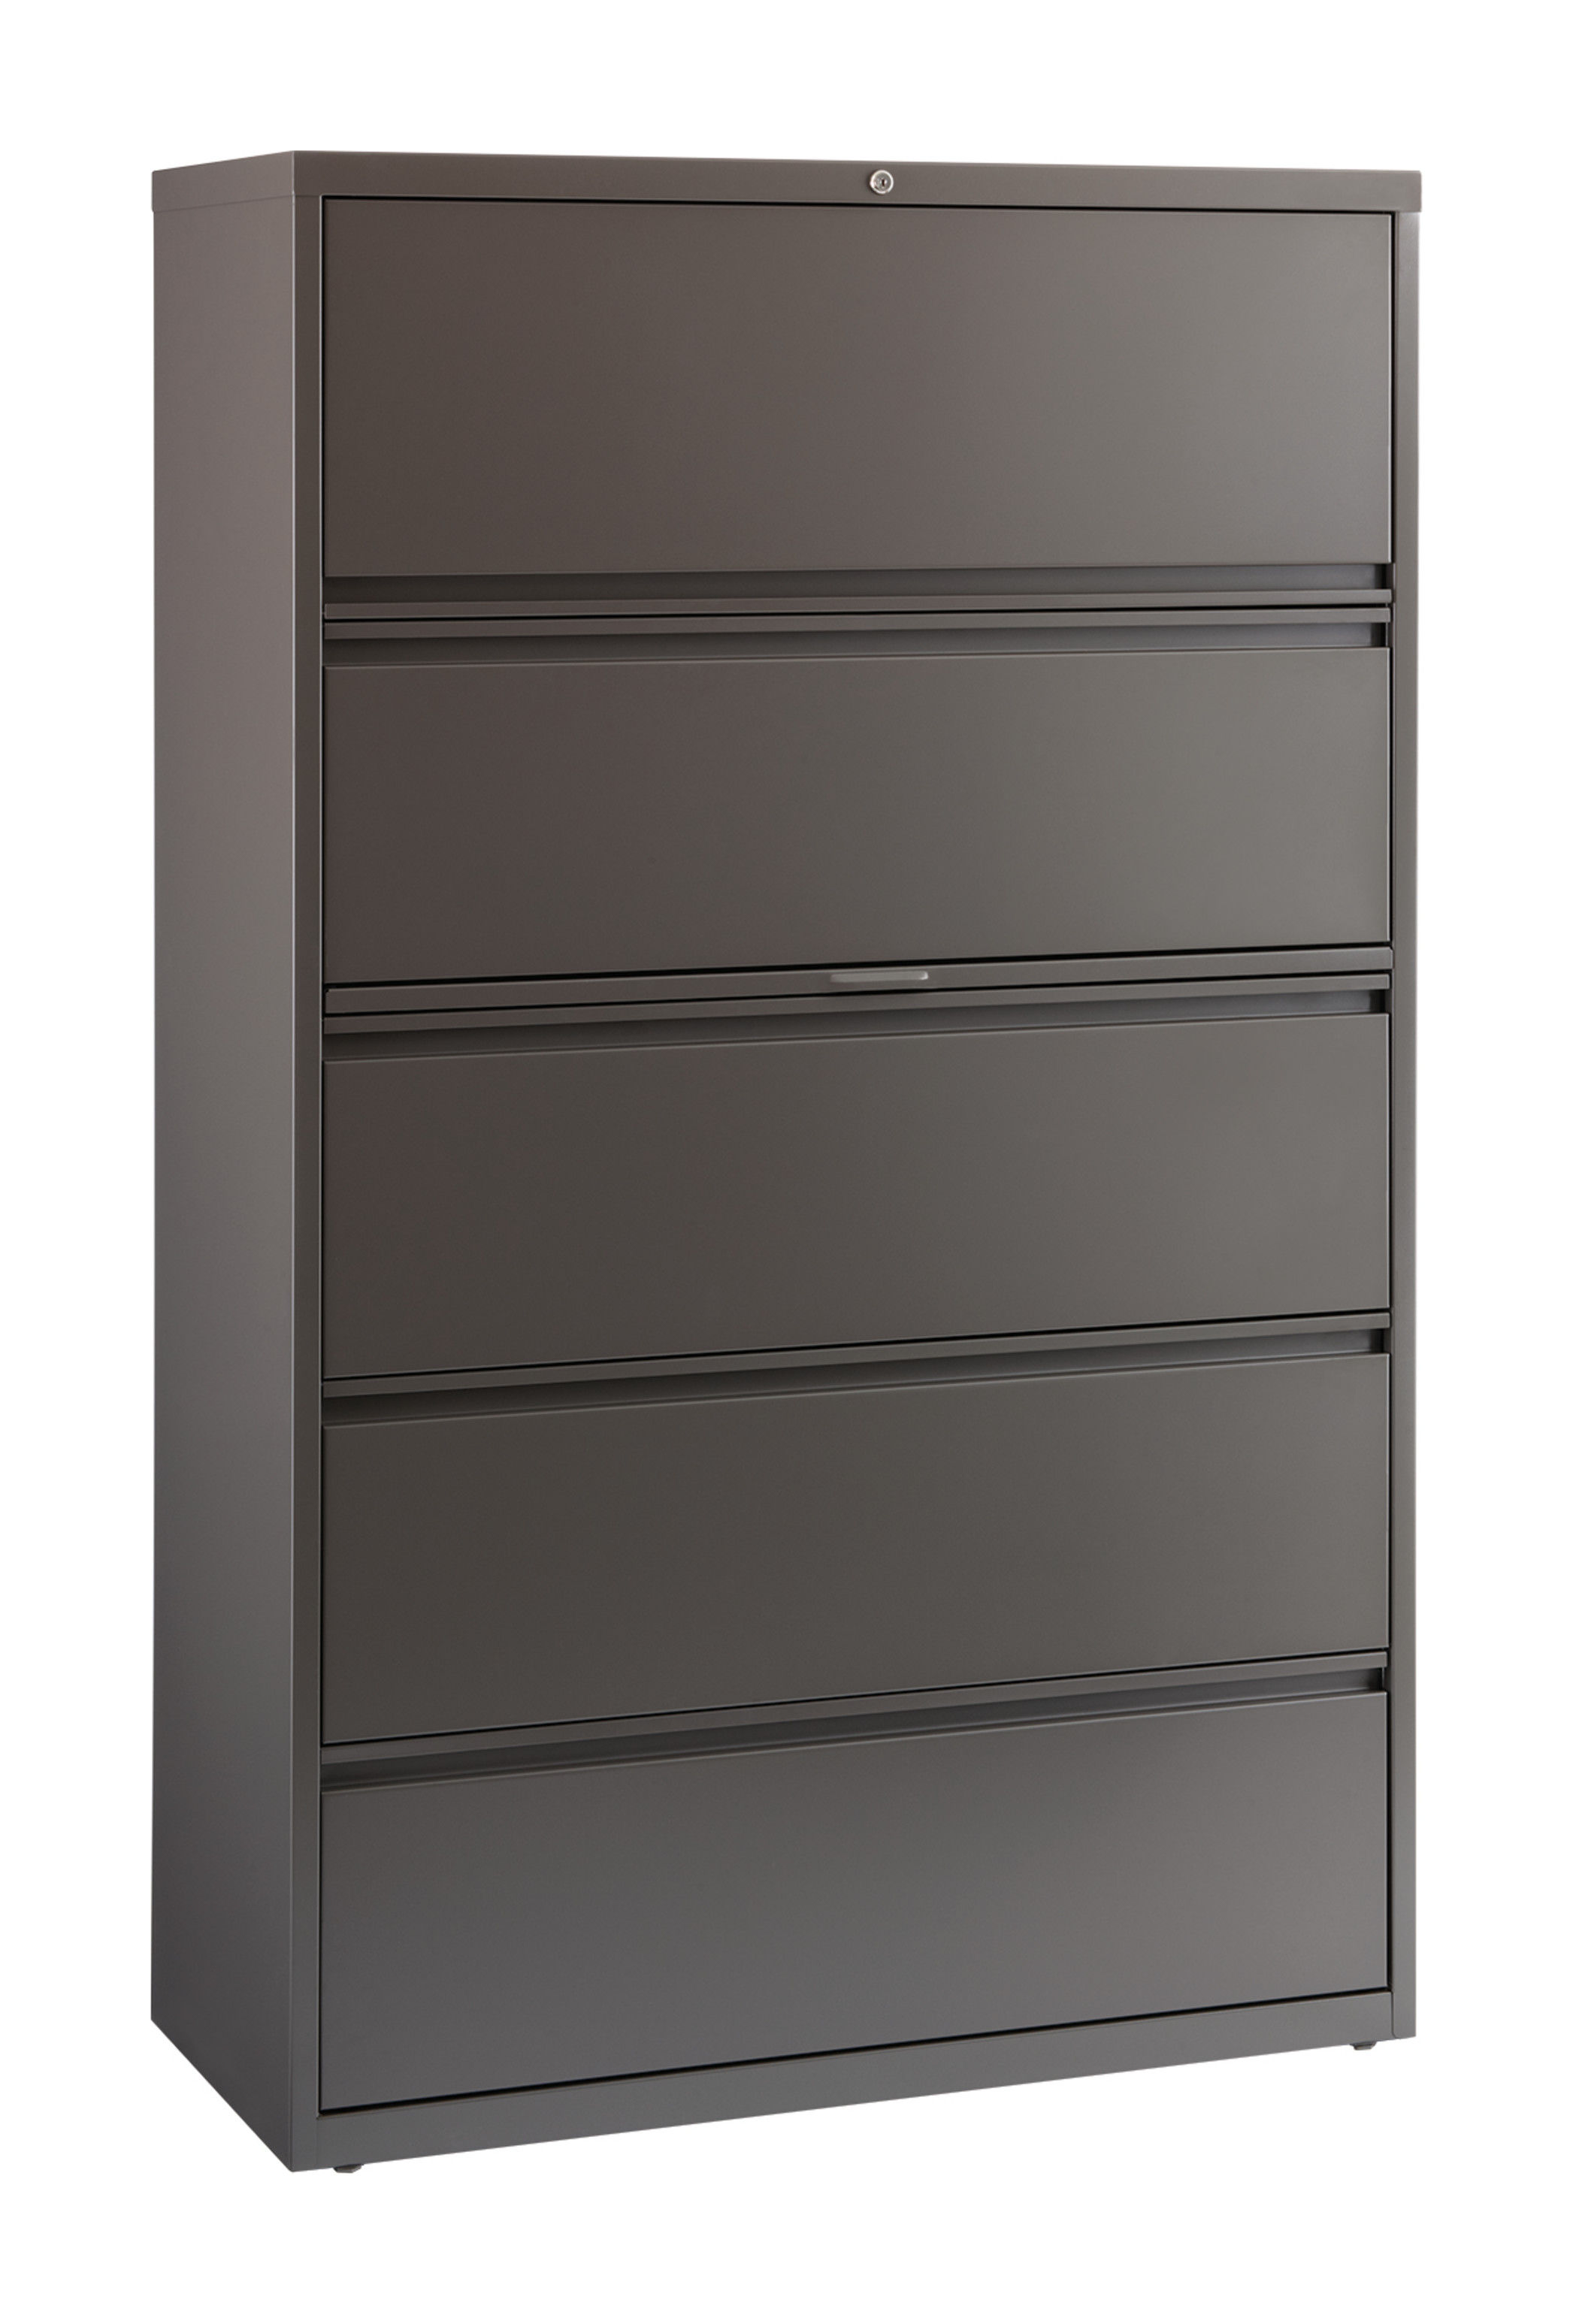 Hirsh 42 inch Wide 5 Drawer Metal Lateral File Cabinet for Home and Office, Holds Letter, Legal and A4 Hanging Folders, Medium Tone Brown - image 1 of 6